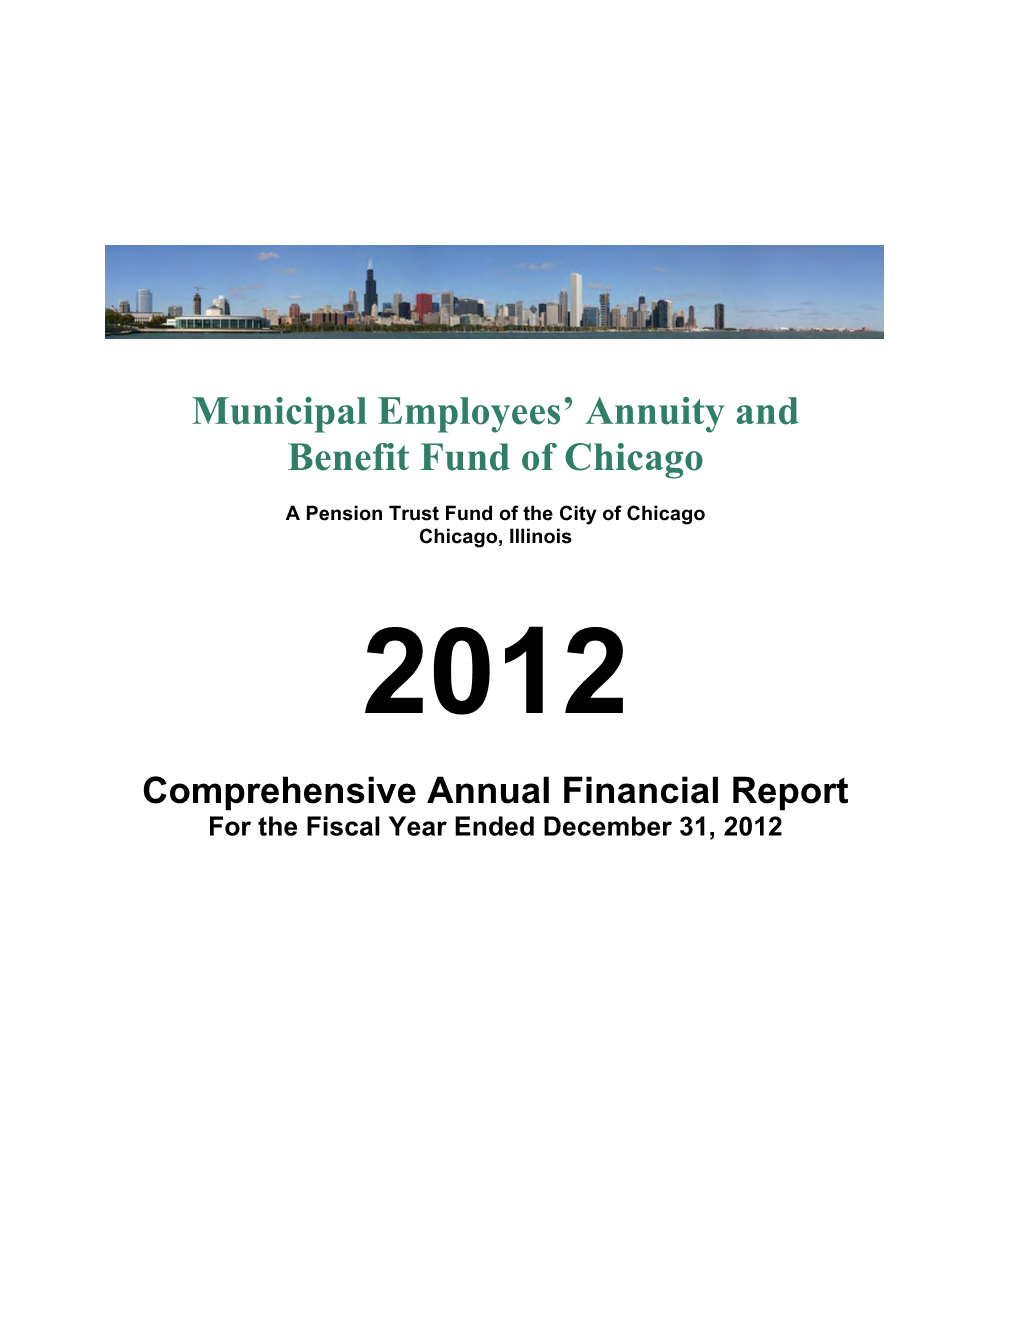 2012 Comprehensive Annual Financial Report for the Fiscal Year Ended December 31, 2012